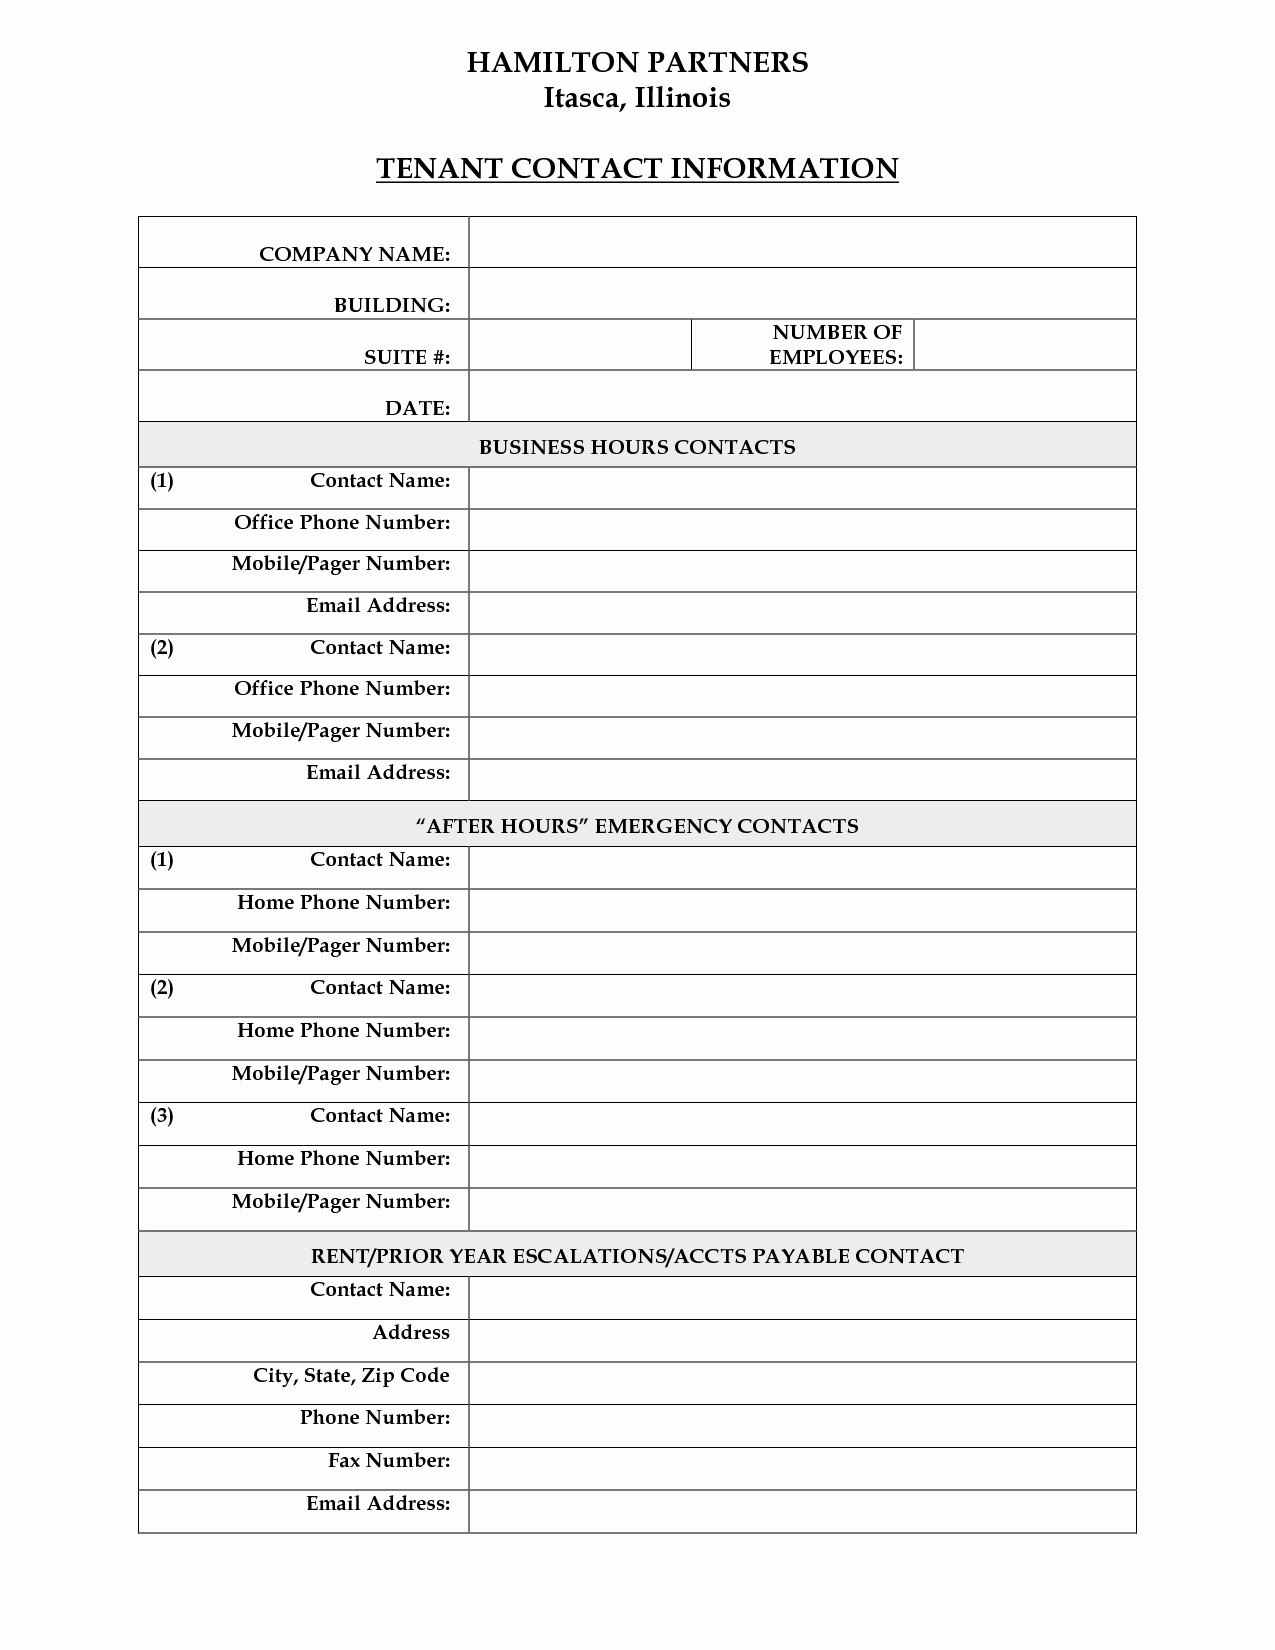 Emergency Contact List for Business Lovely Best S Of Tenant Contact Information form Template